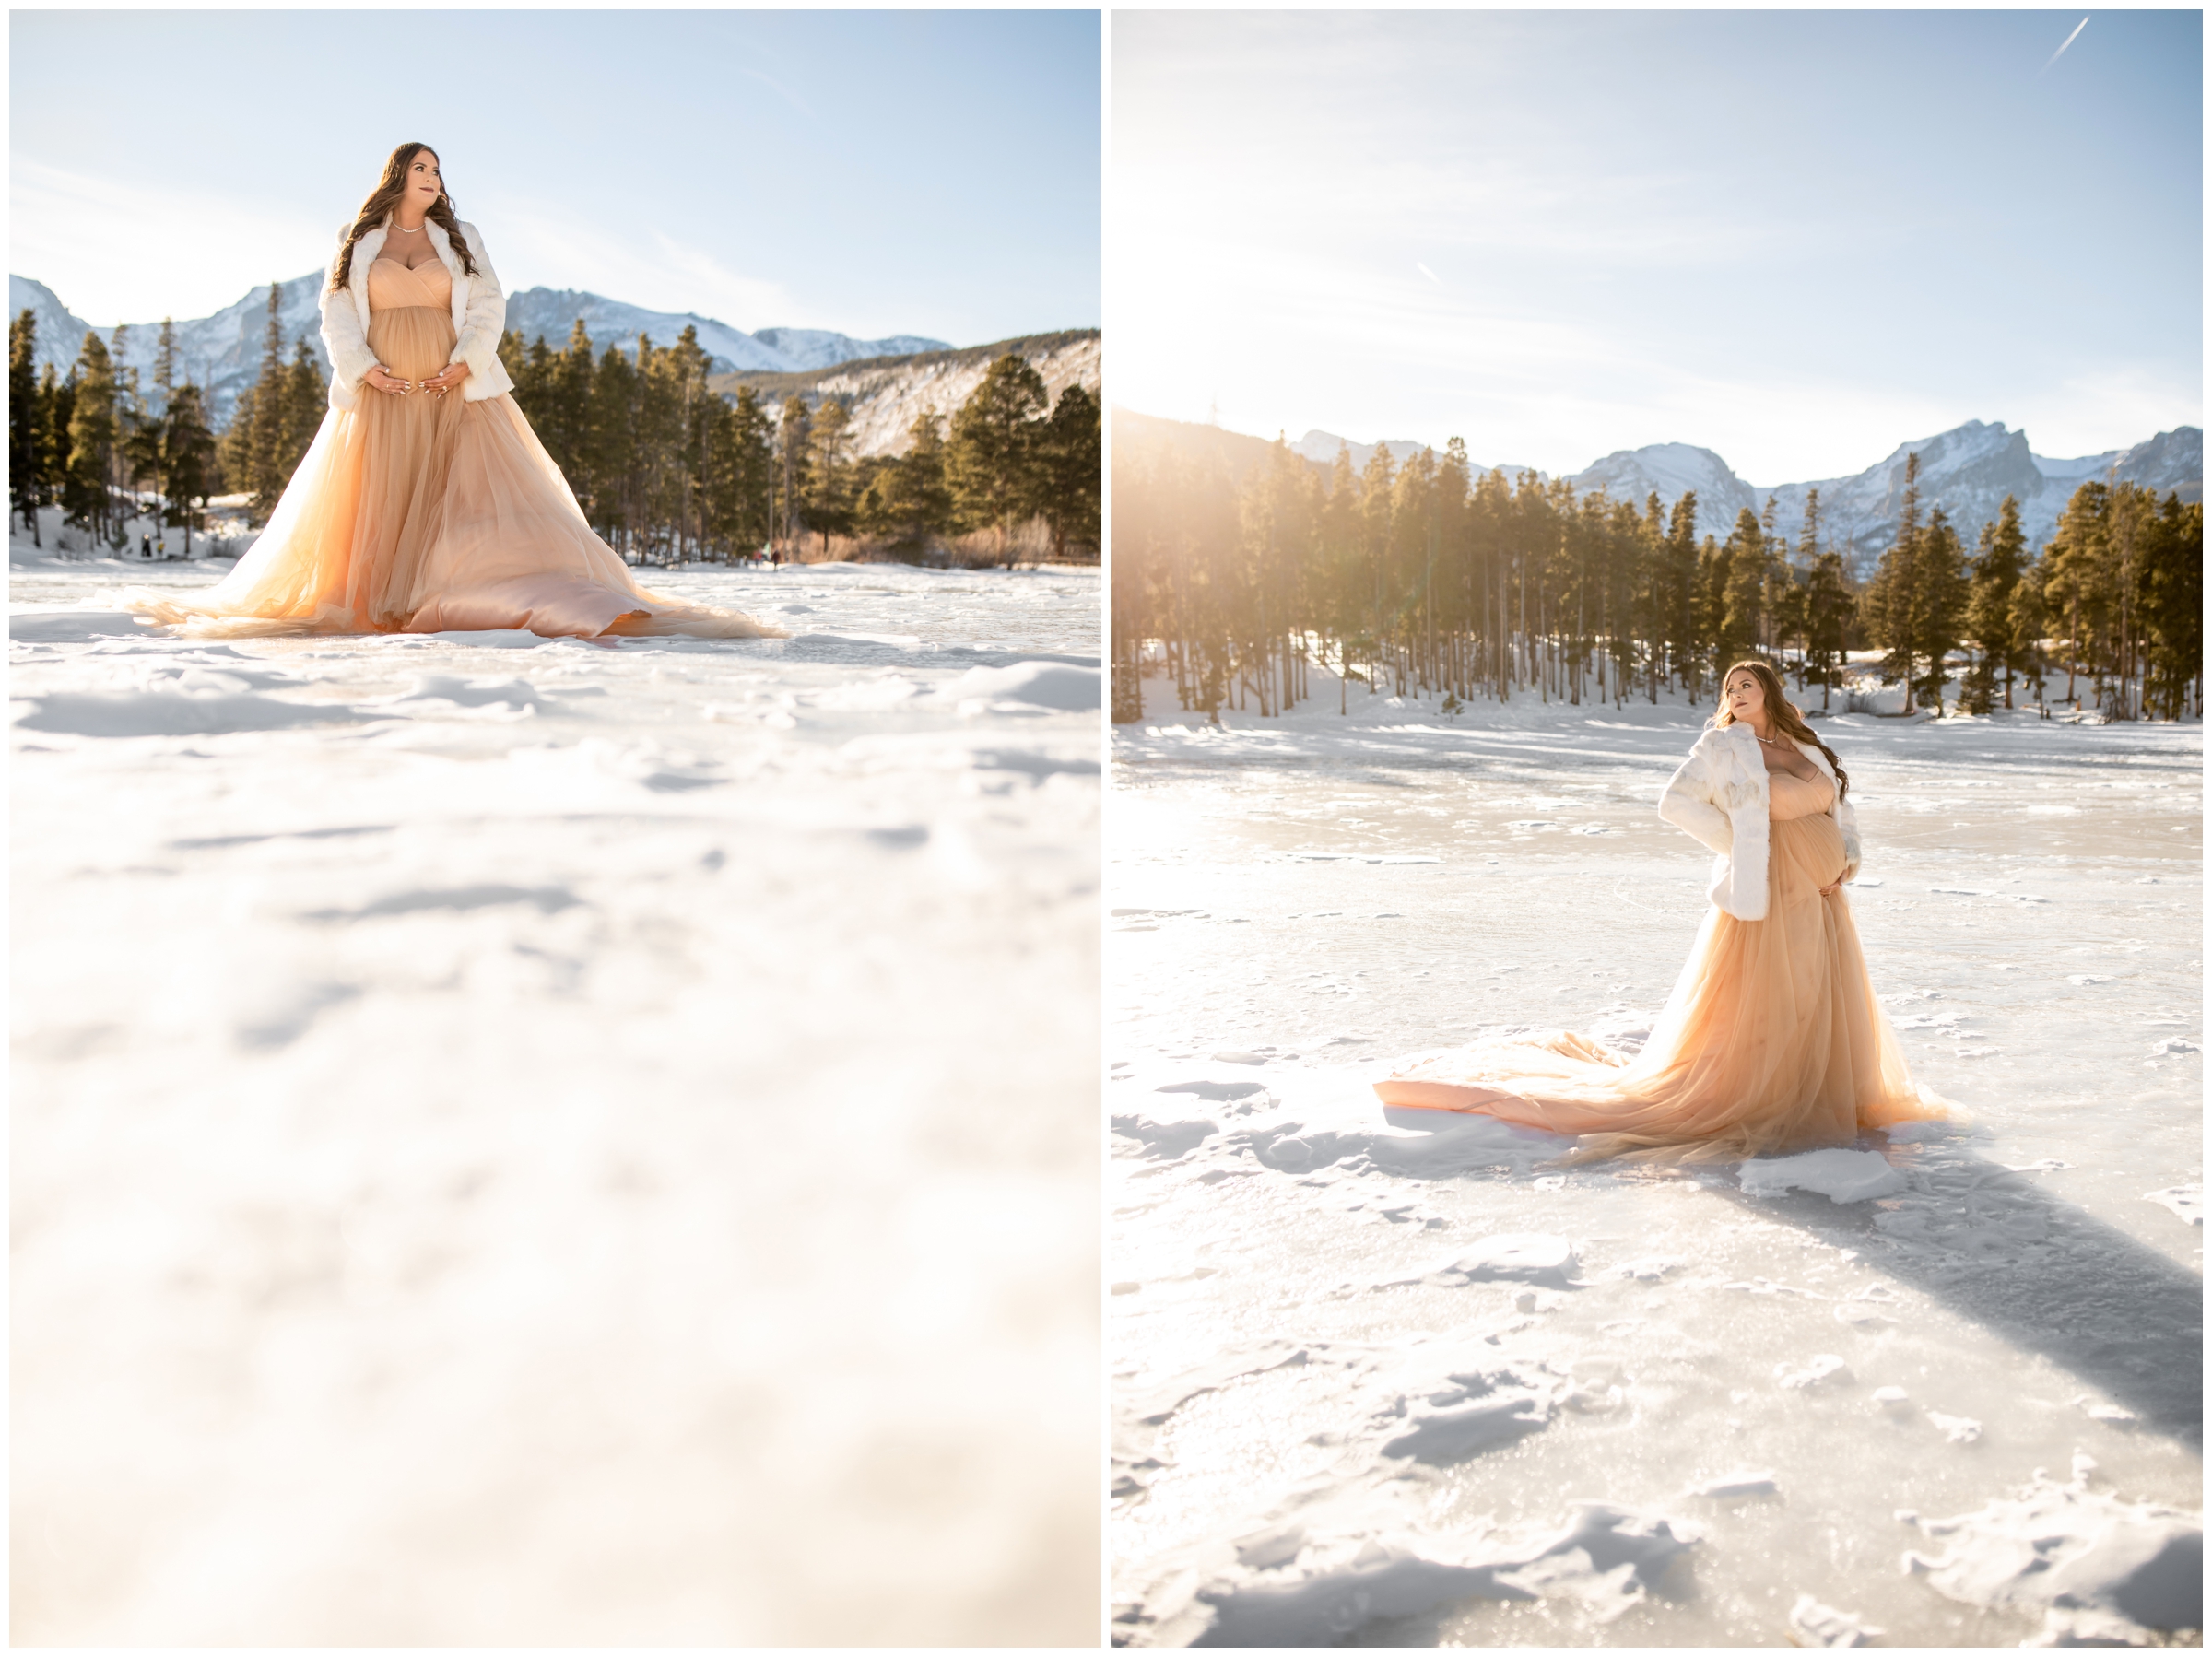 Colorado winter maternity photography at Sprague Lake in Rocky Mountain National Park by Estes Park photographer Plum Pretty Photography